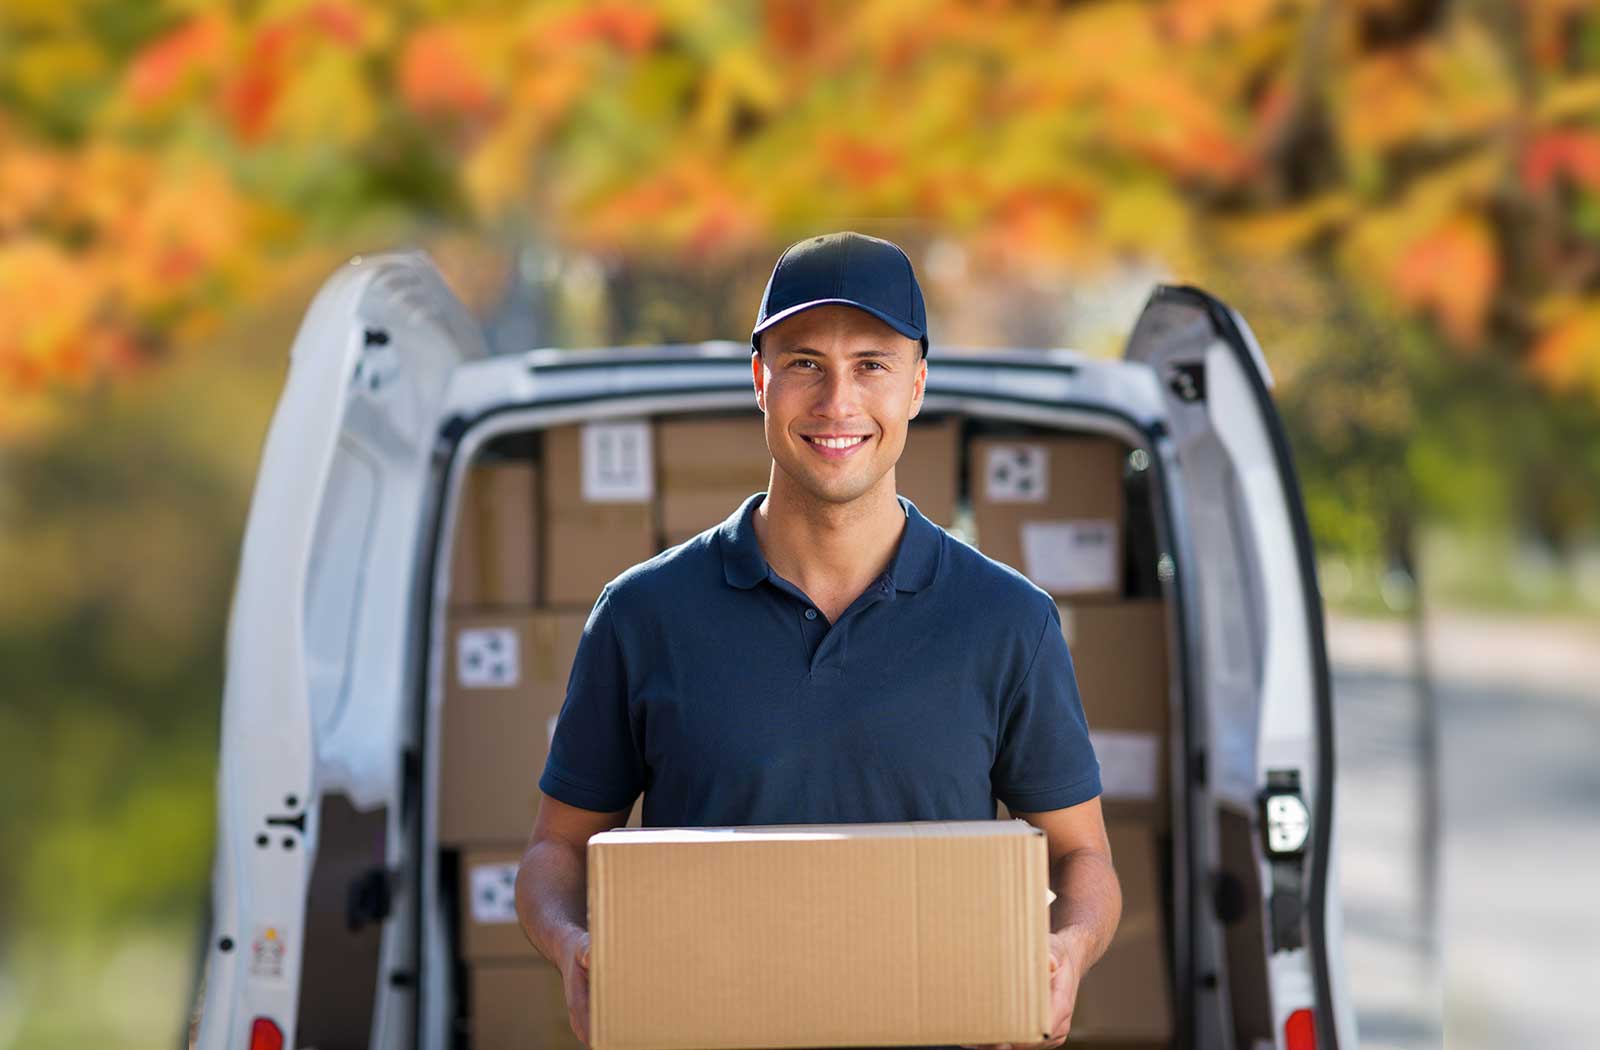 Why is comparing courier services important?